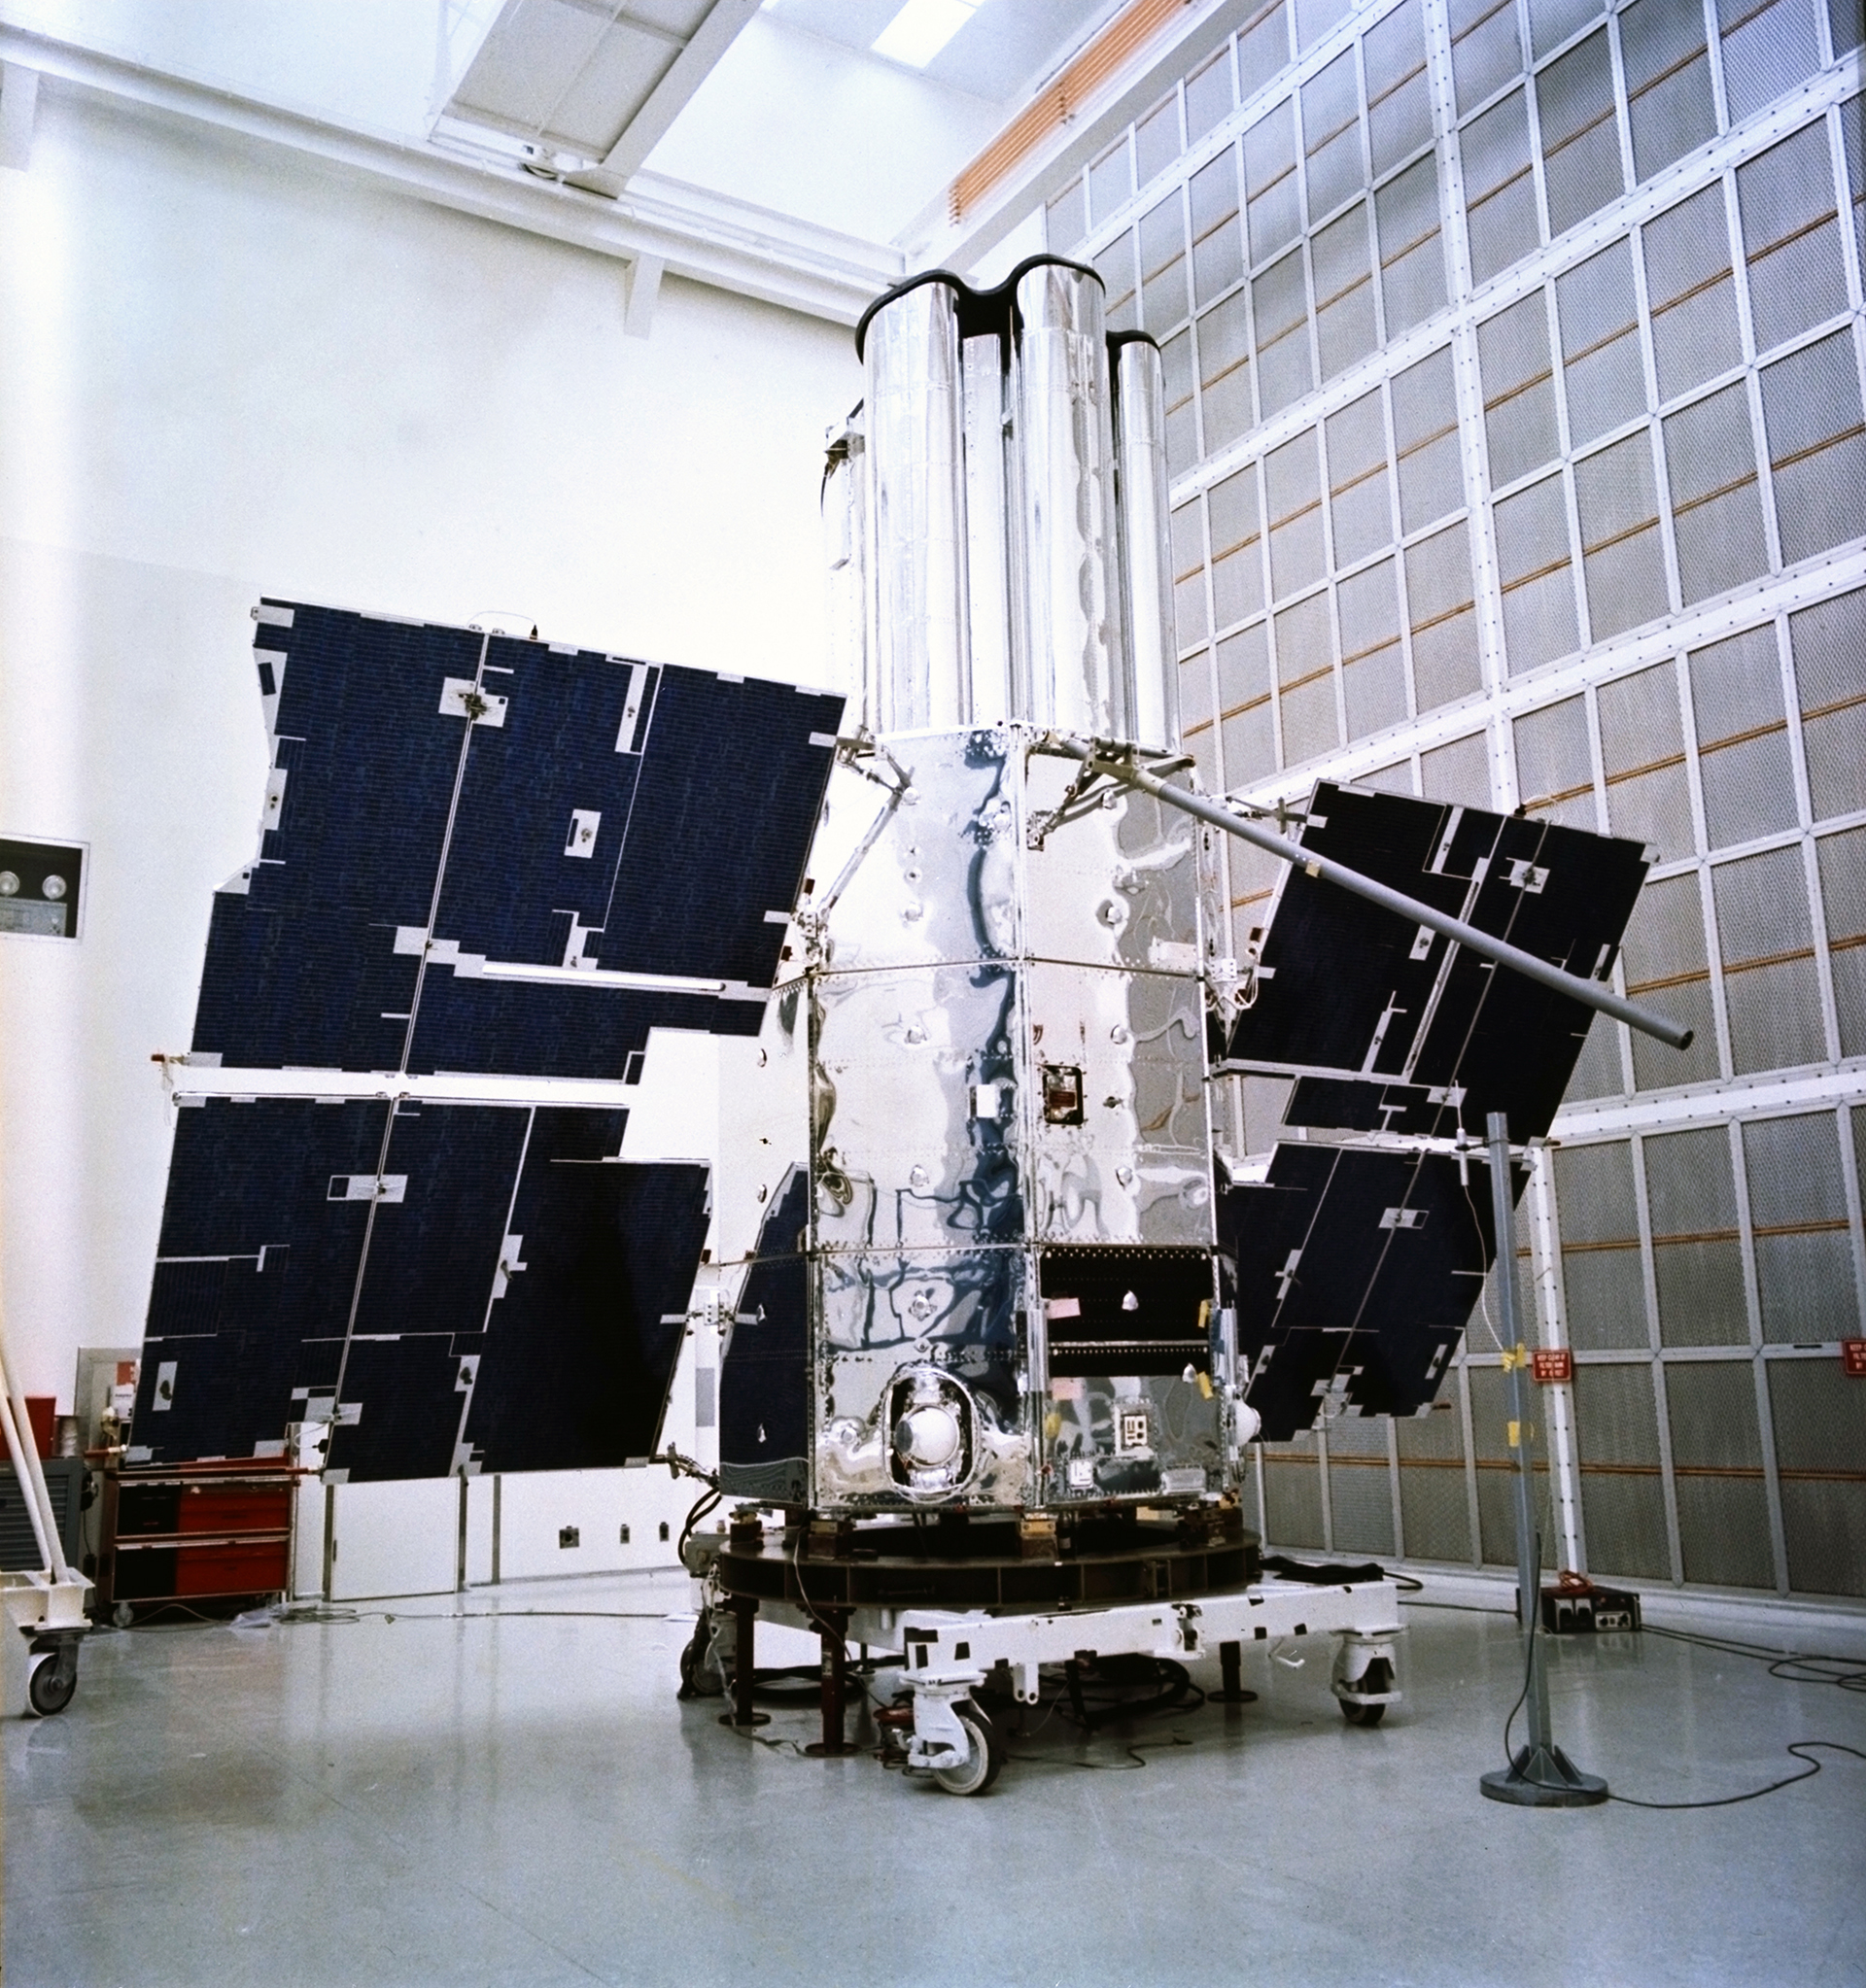 Blue-black solar panels extend from the spacecraft's metal body, which reflects the brightly lit interior of its clean room.   